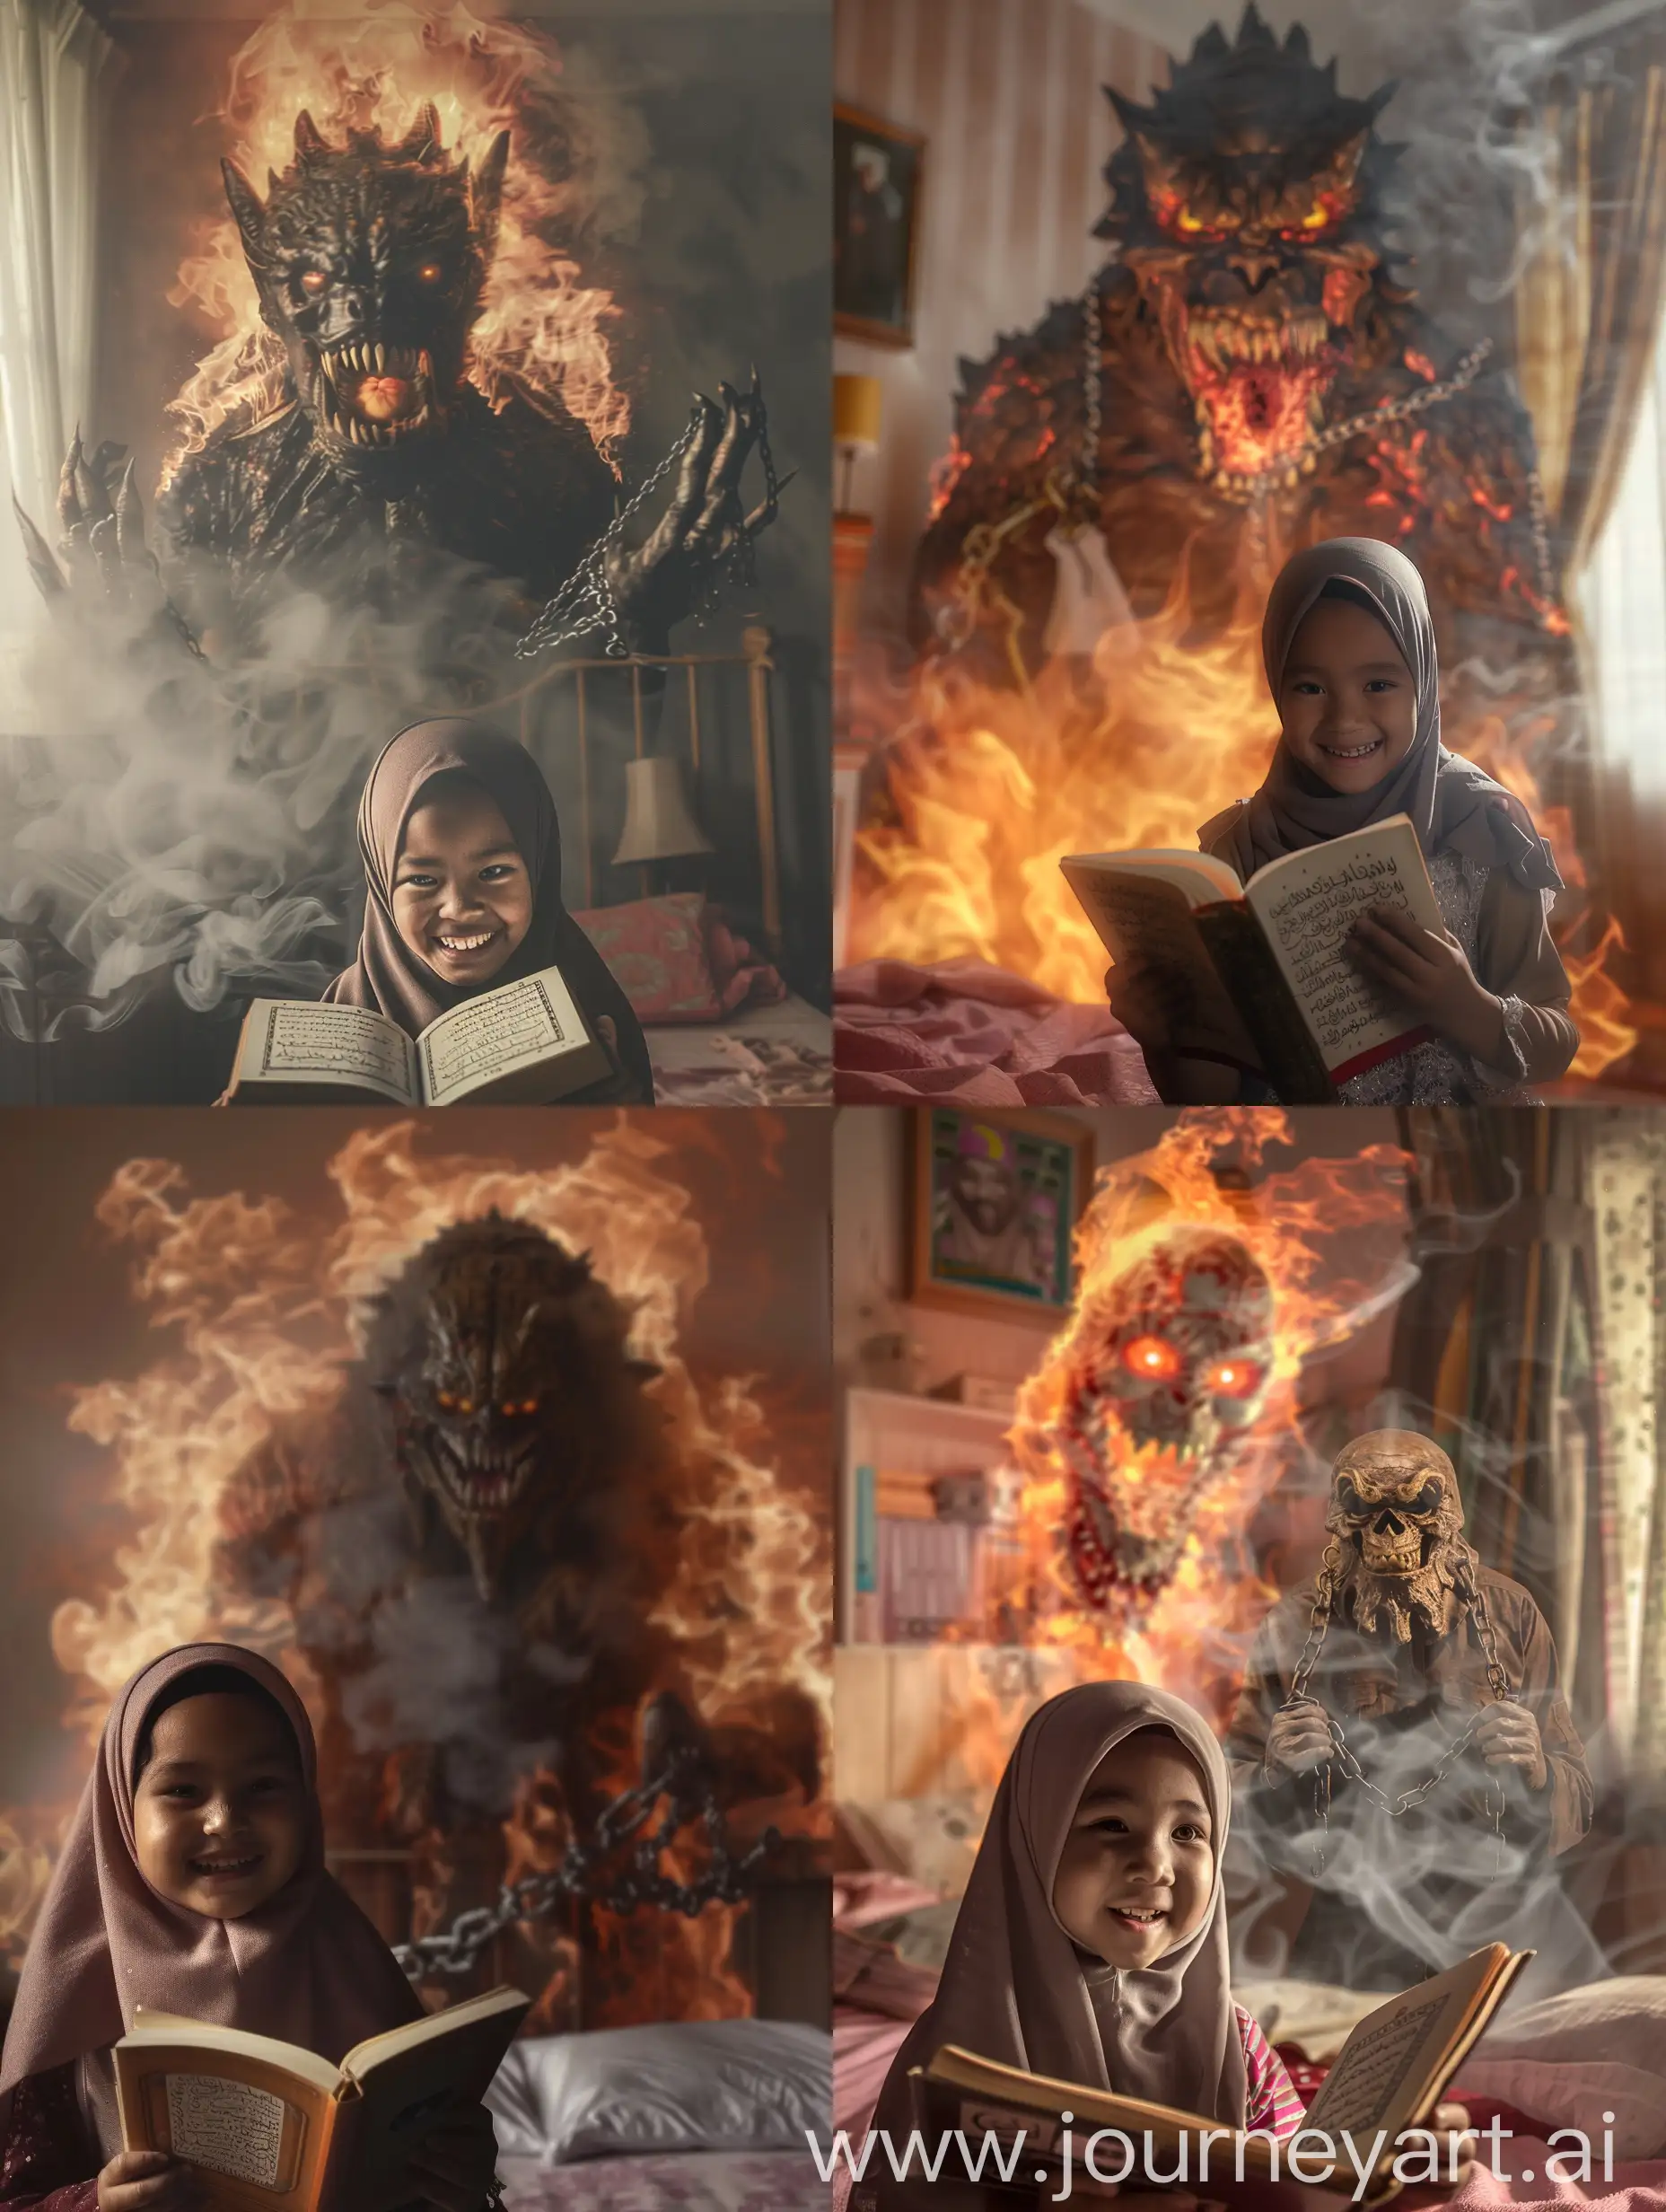 A 10 year old Indonesian girl wearing a hijab is reading the Koran in her bedroom while smiling. Behind him was a tall, huge, fiery, smoking monster, with his hands shackled in chains, staring intently at the child. original photo, realistic, high detail, wide shot